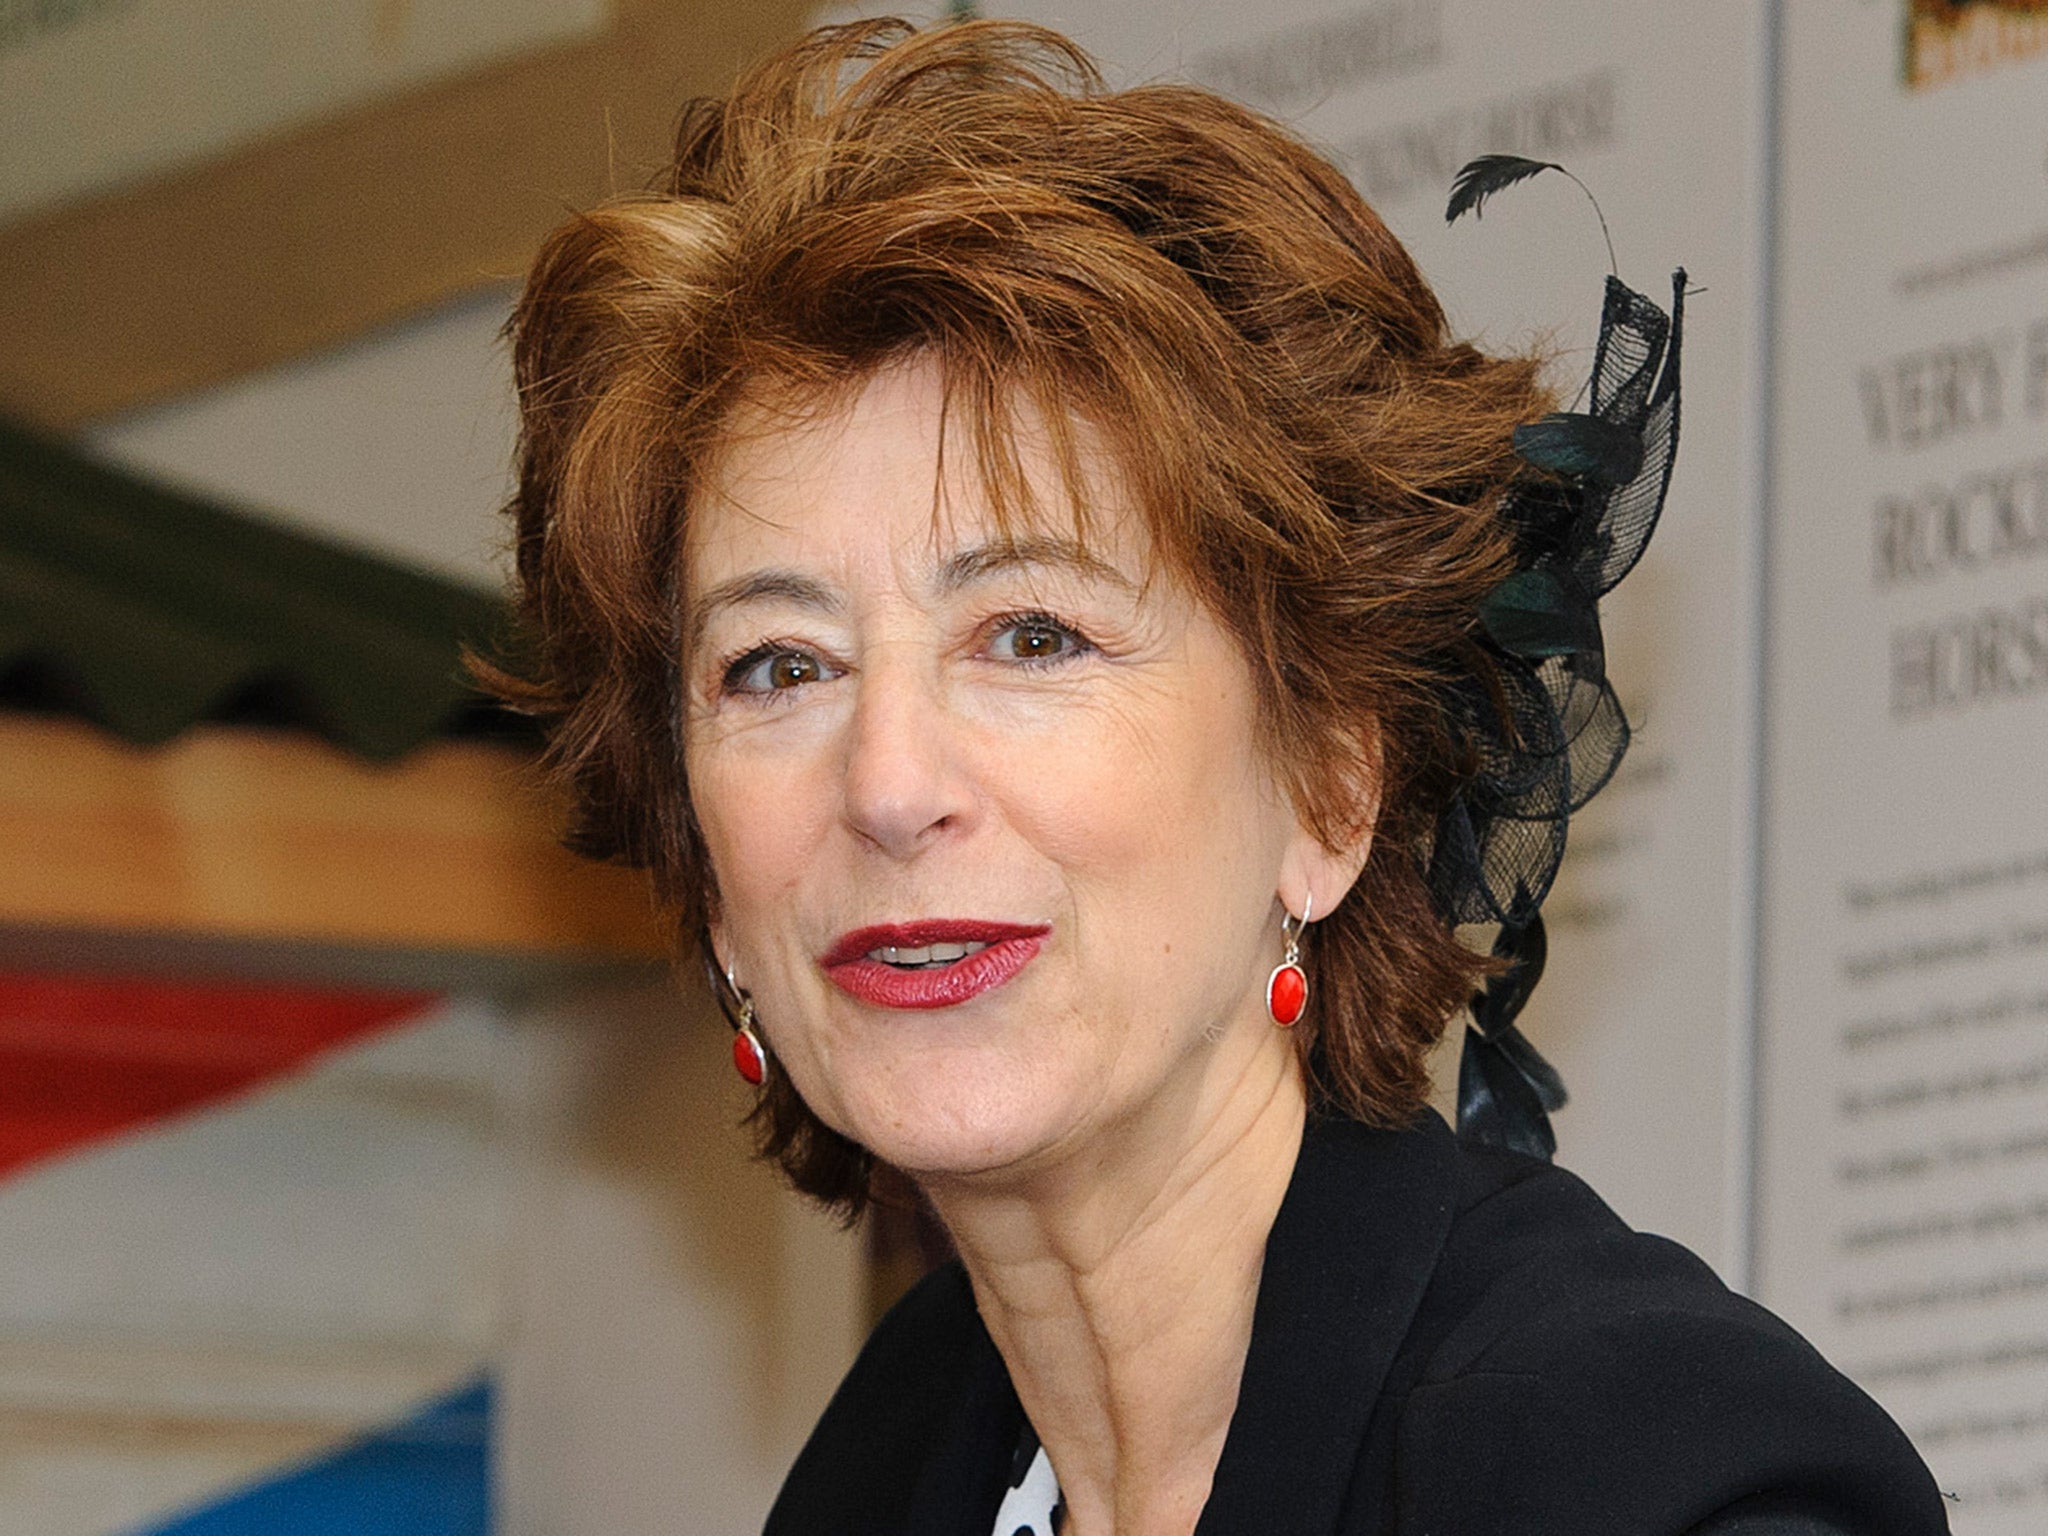 Maureen Lipman Considering Leaving The Uk Due To Rise In Anti Semitism The Independent